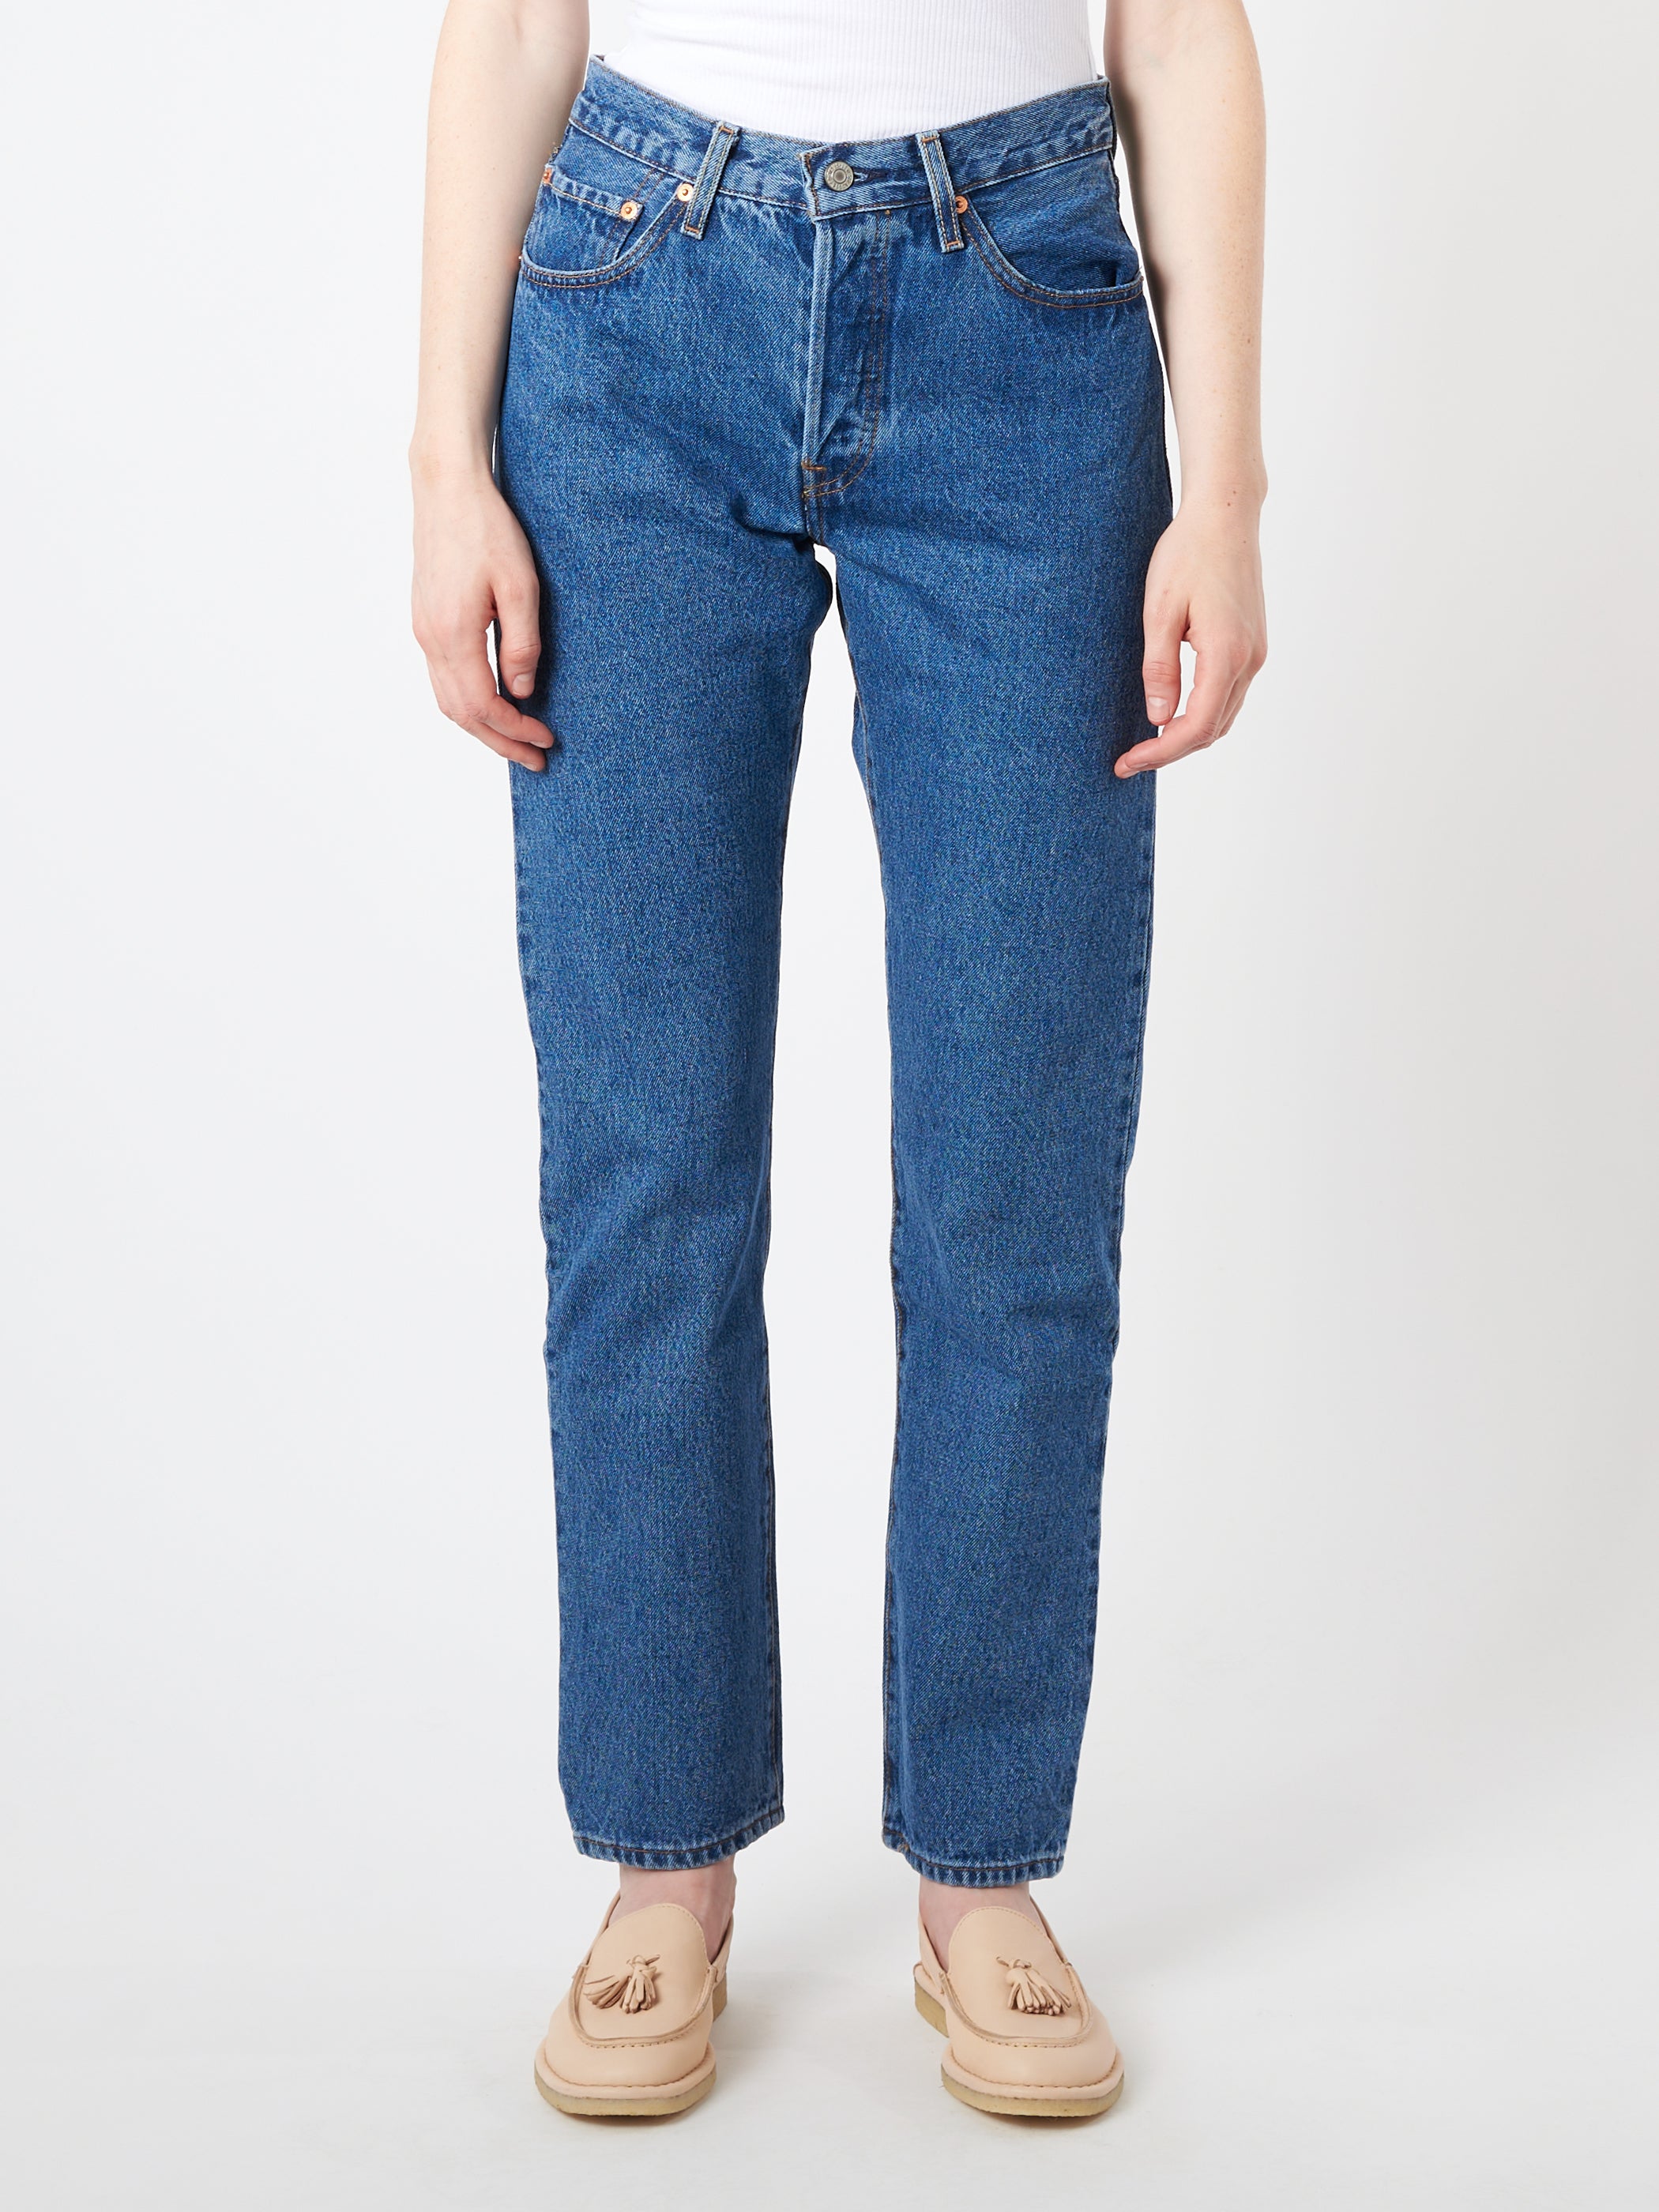 Levi's - 501 Original in Shout Out Stone (Medium Wash) – gravitypope